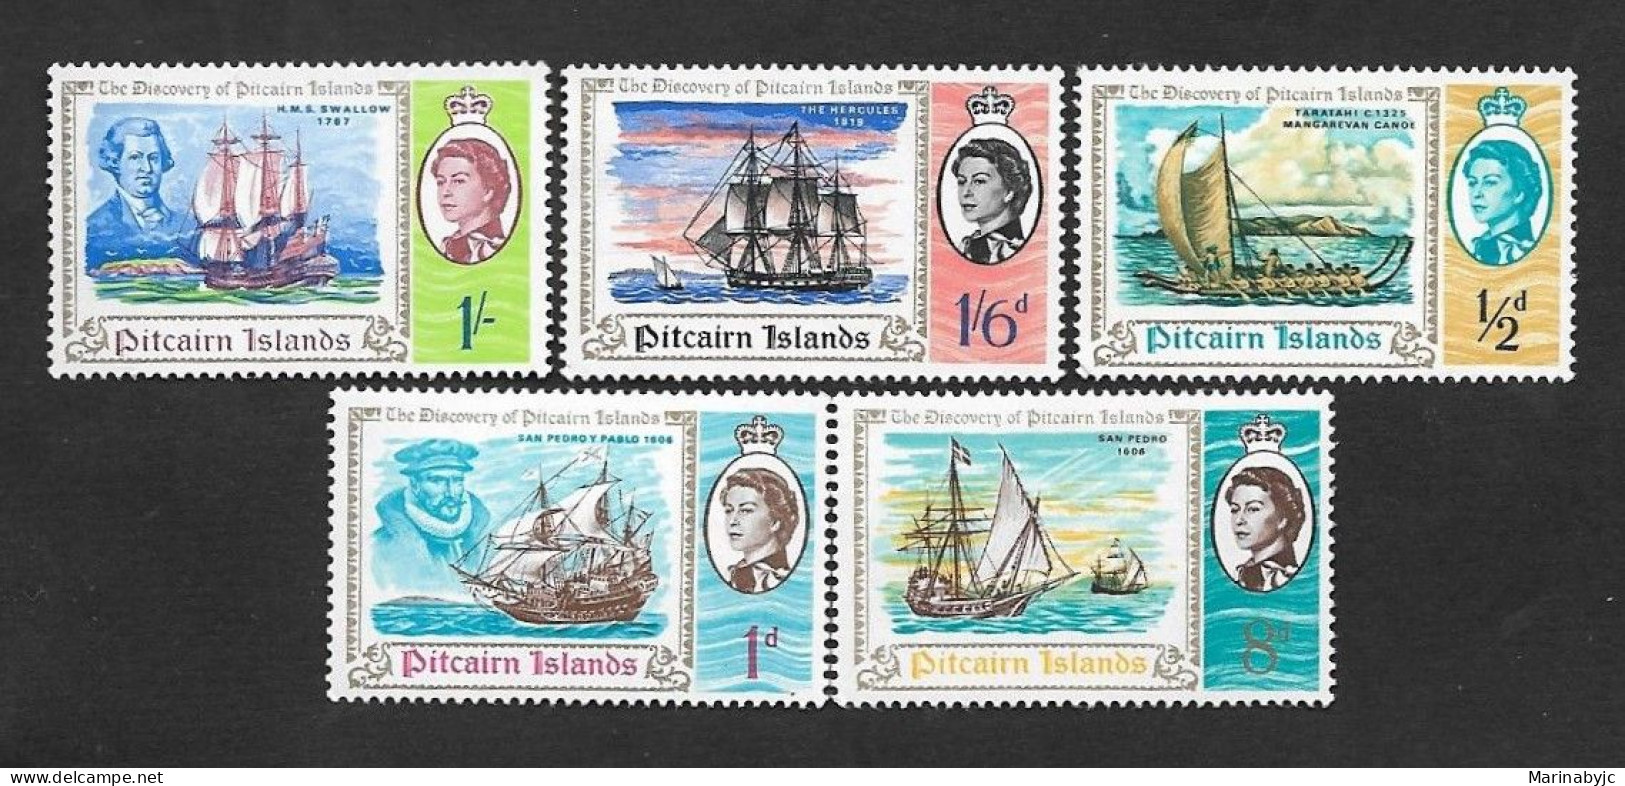 SE)1967 PITCAIRN ISLANDS, BICENTENARY OF THE DISCOVERY OF THE ISLAND BY CAPTAIN PHILIP CARTERET 5 MNH STAMPS - Altri - Oceania